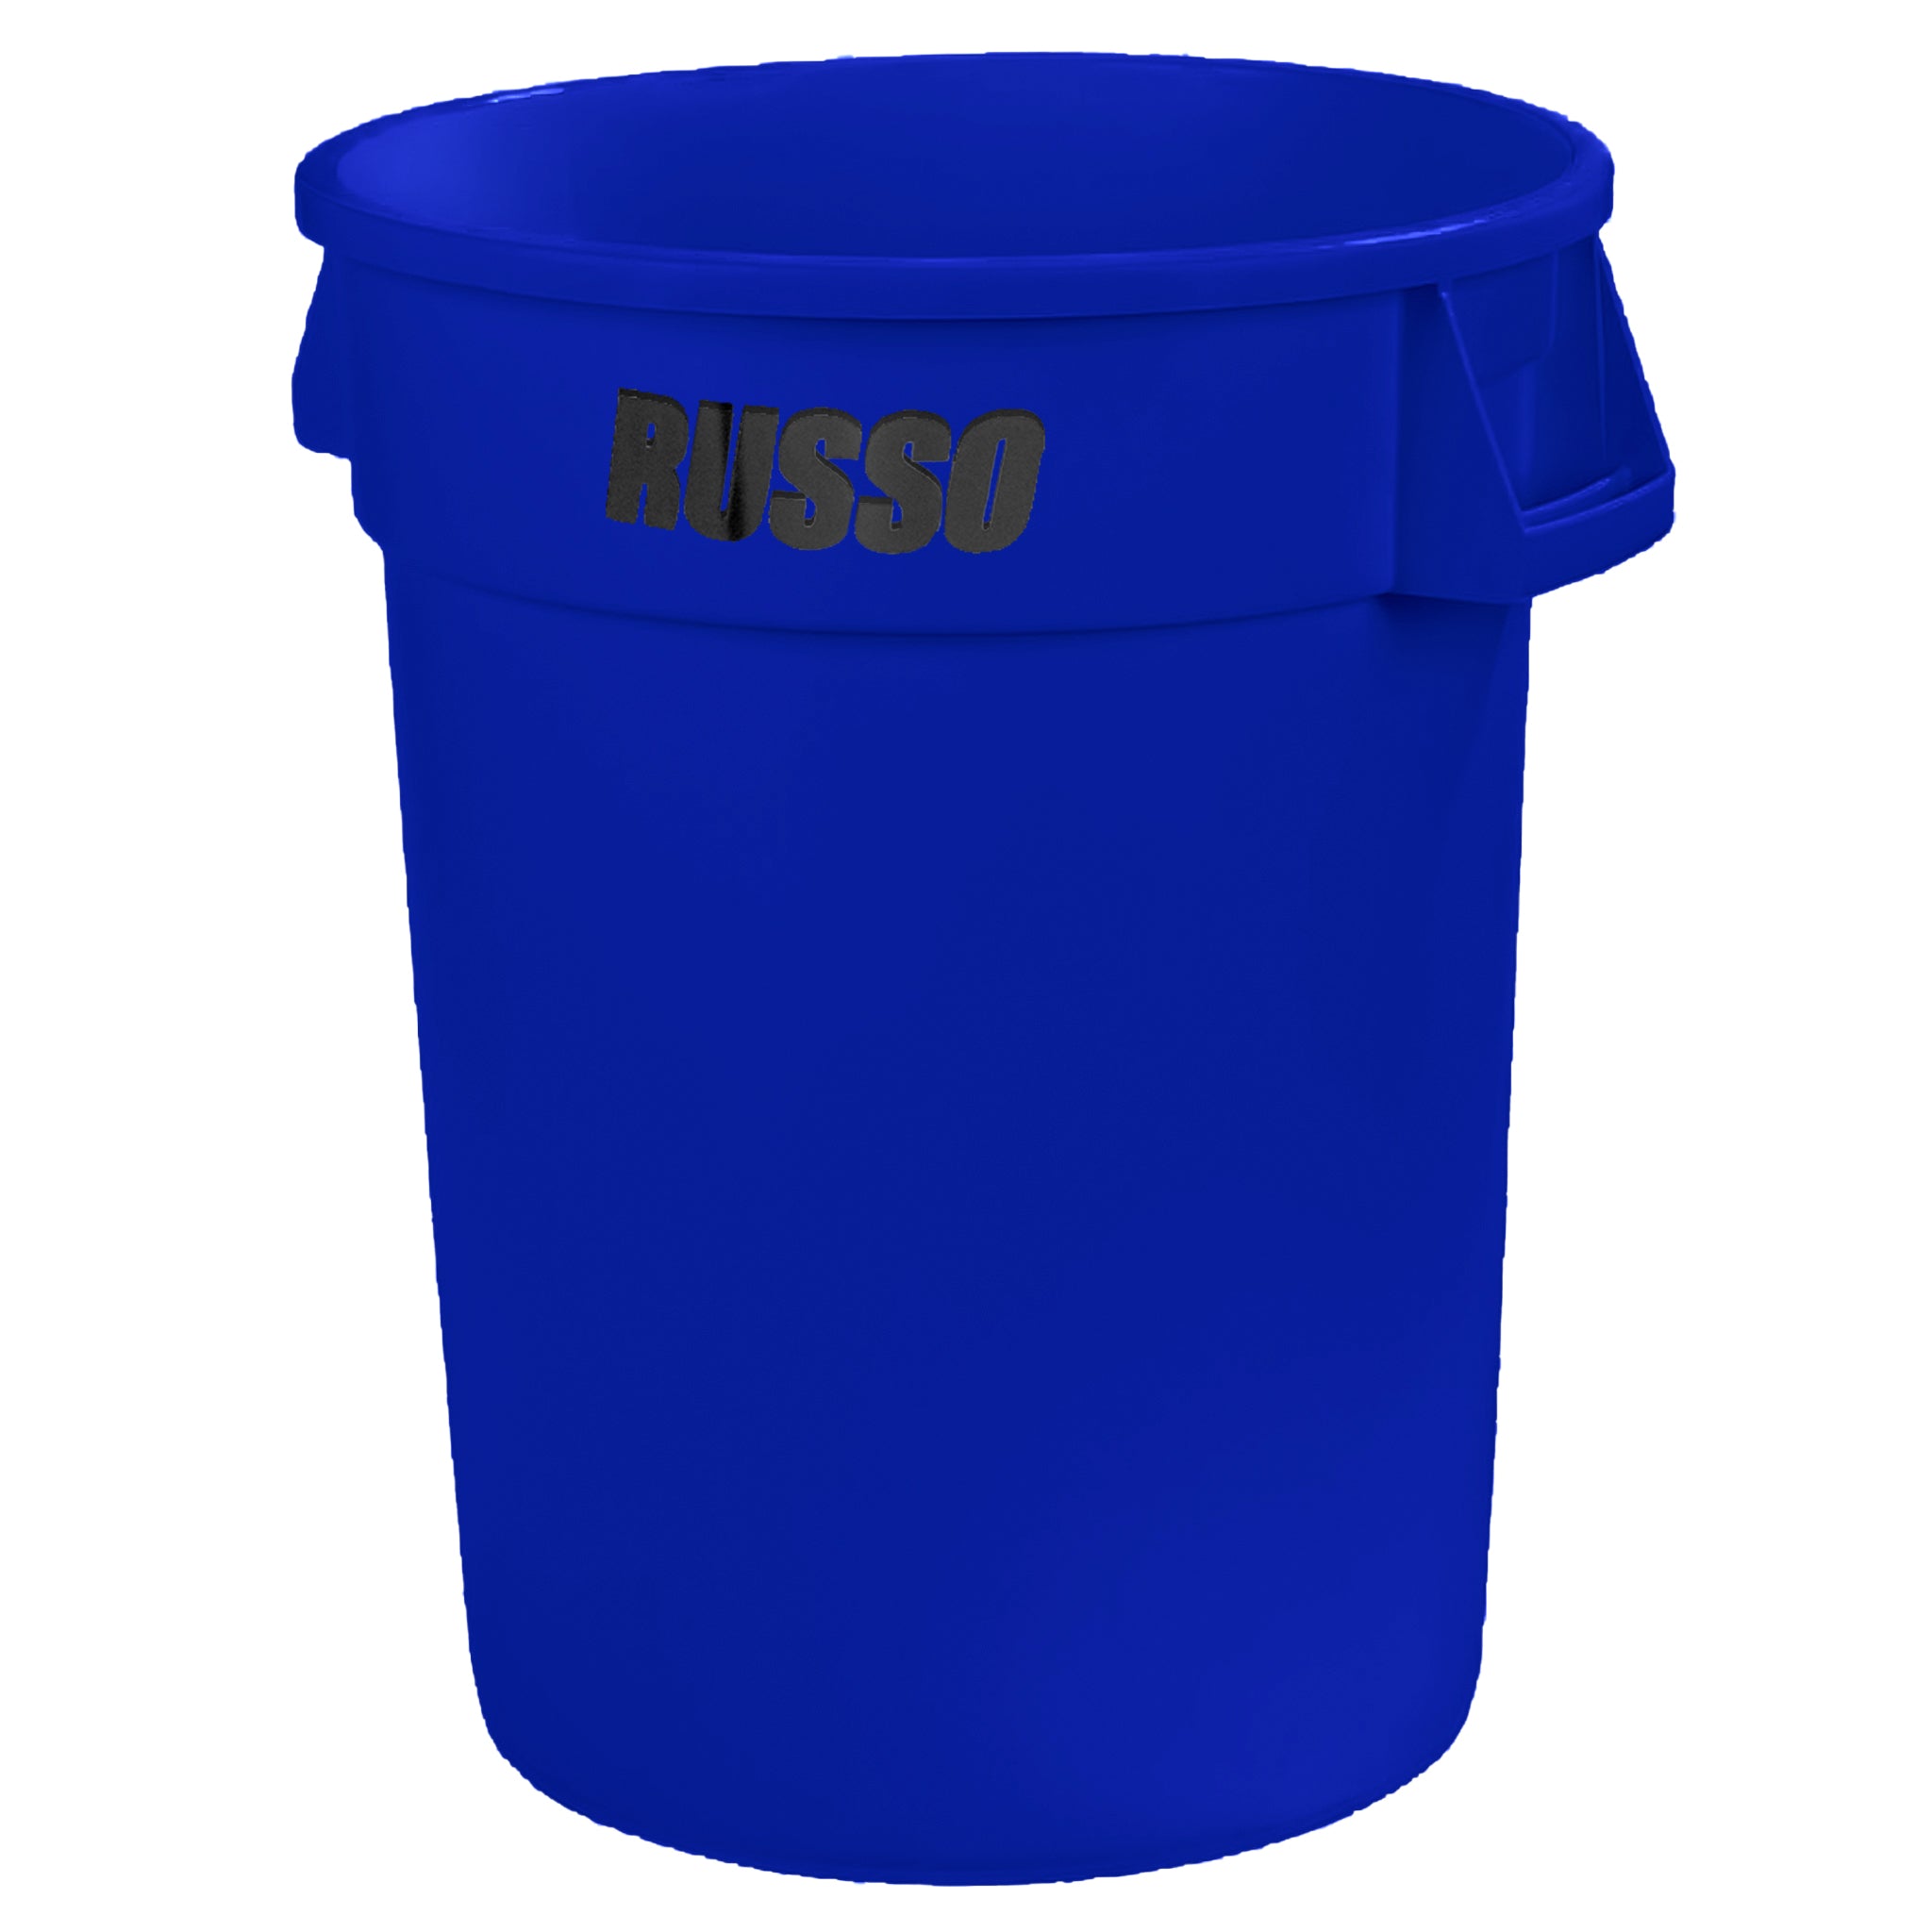 RUSSO Glow Garbage Can 44 Gallon - Blue